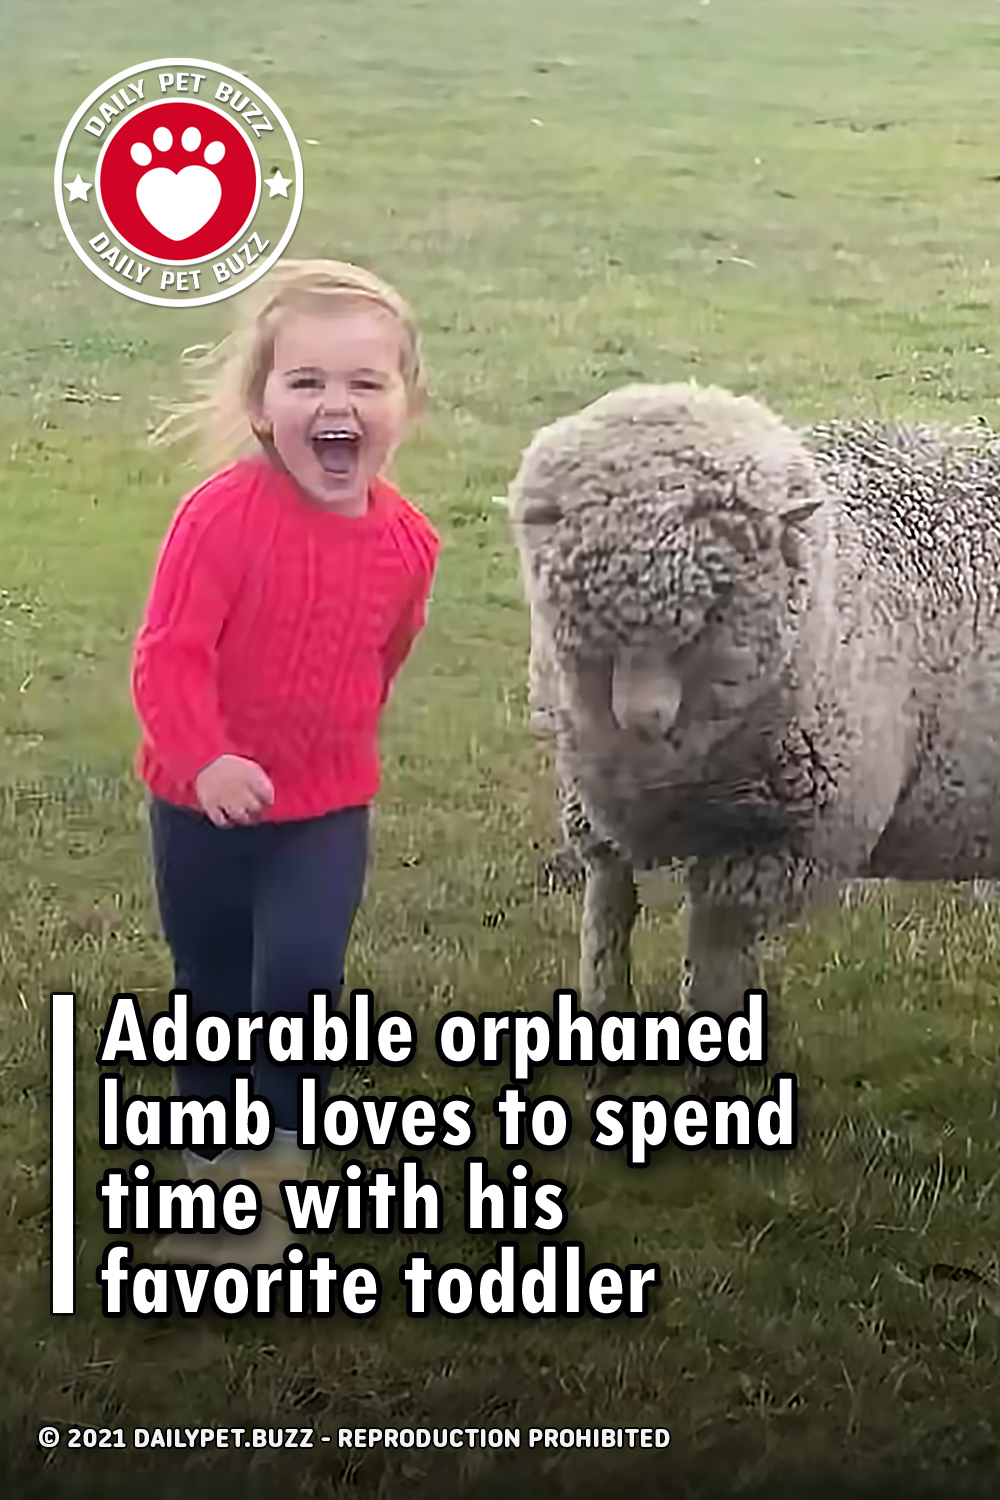 Adorable orphaned lamb loves to spend time with his favorite toddler